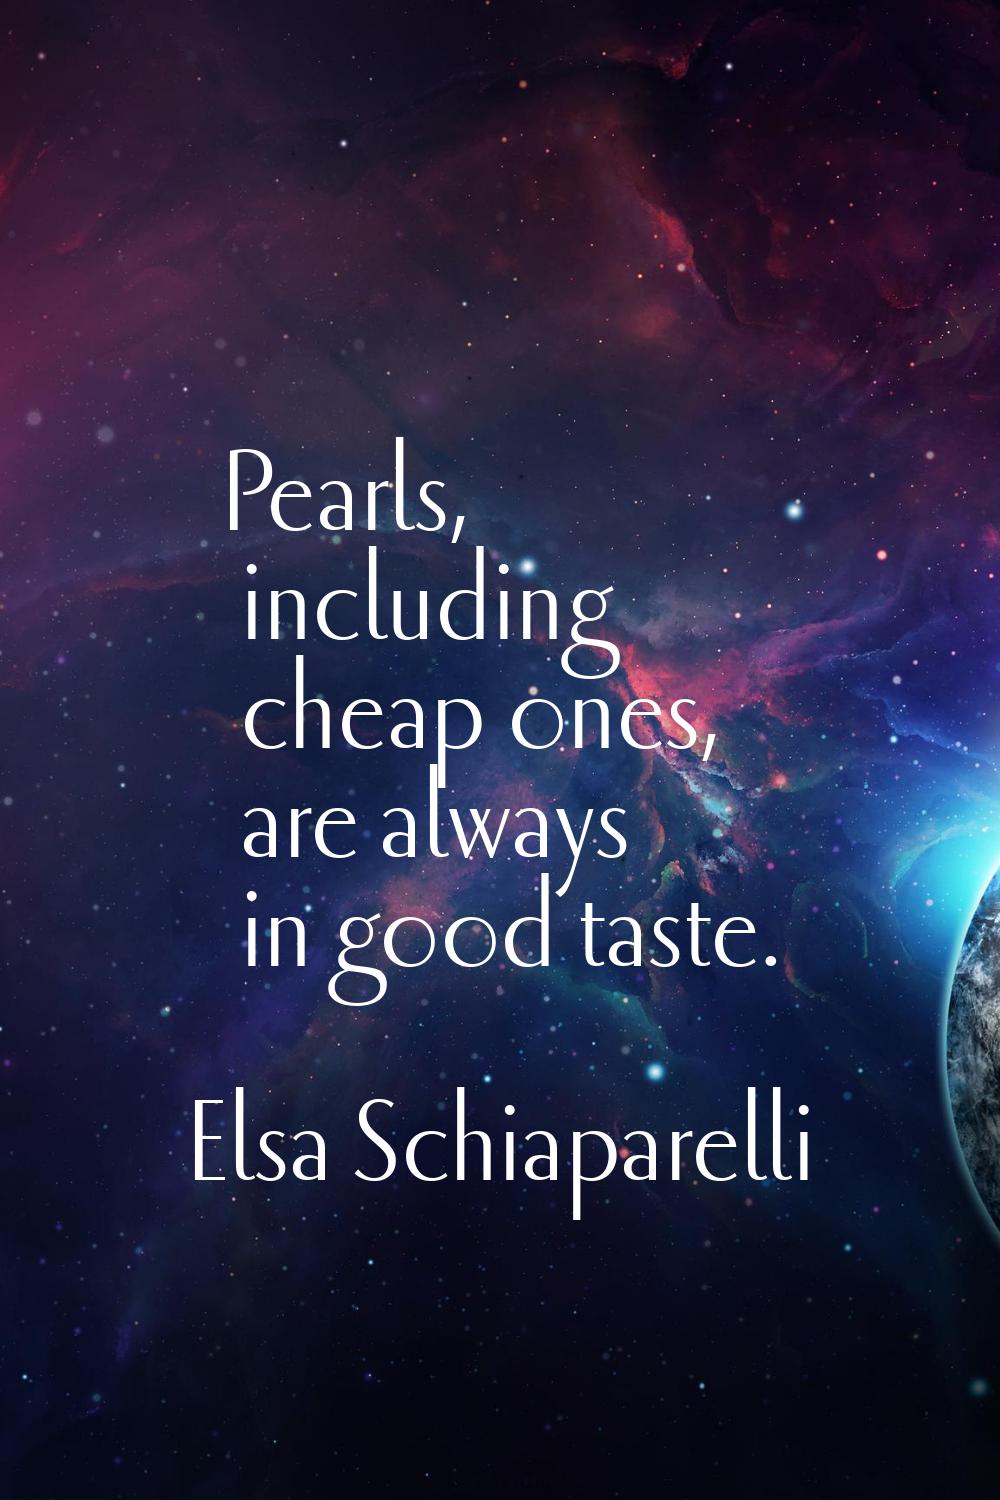 Pearls, including cheap ones, are always in good taste.